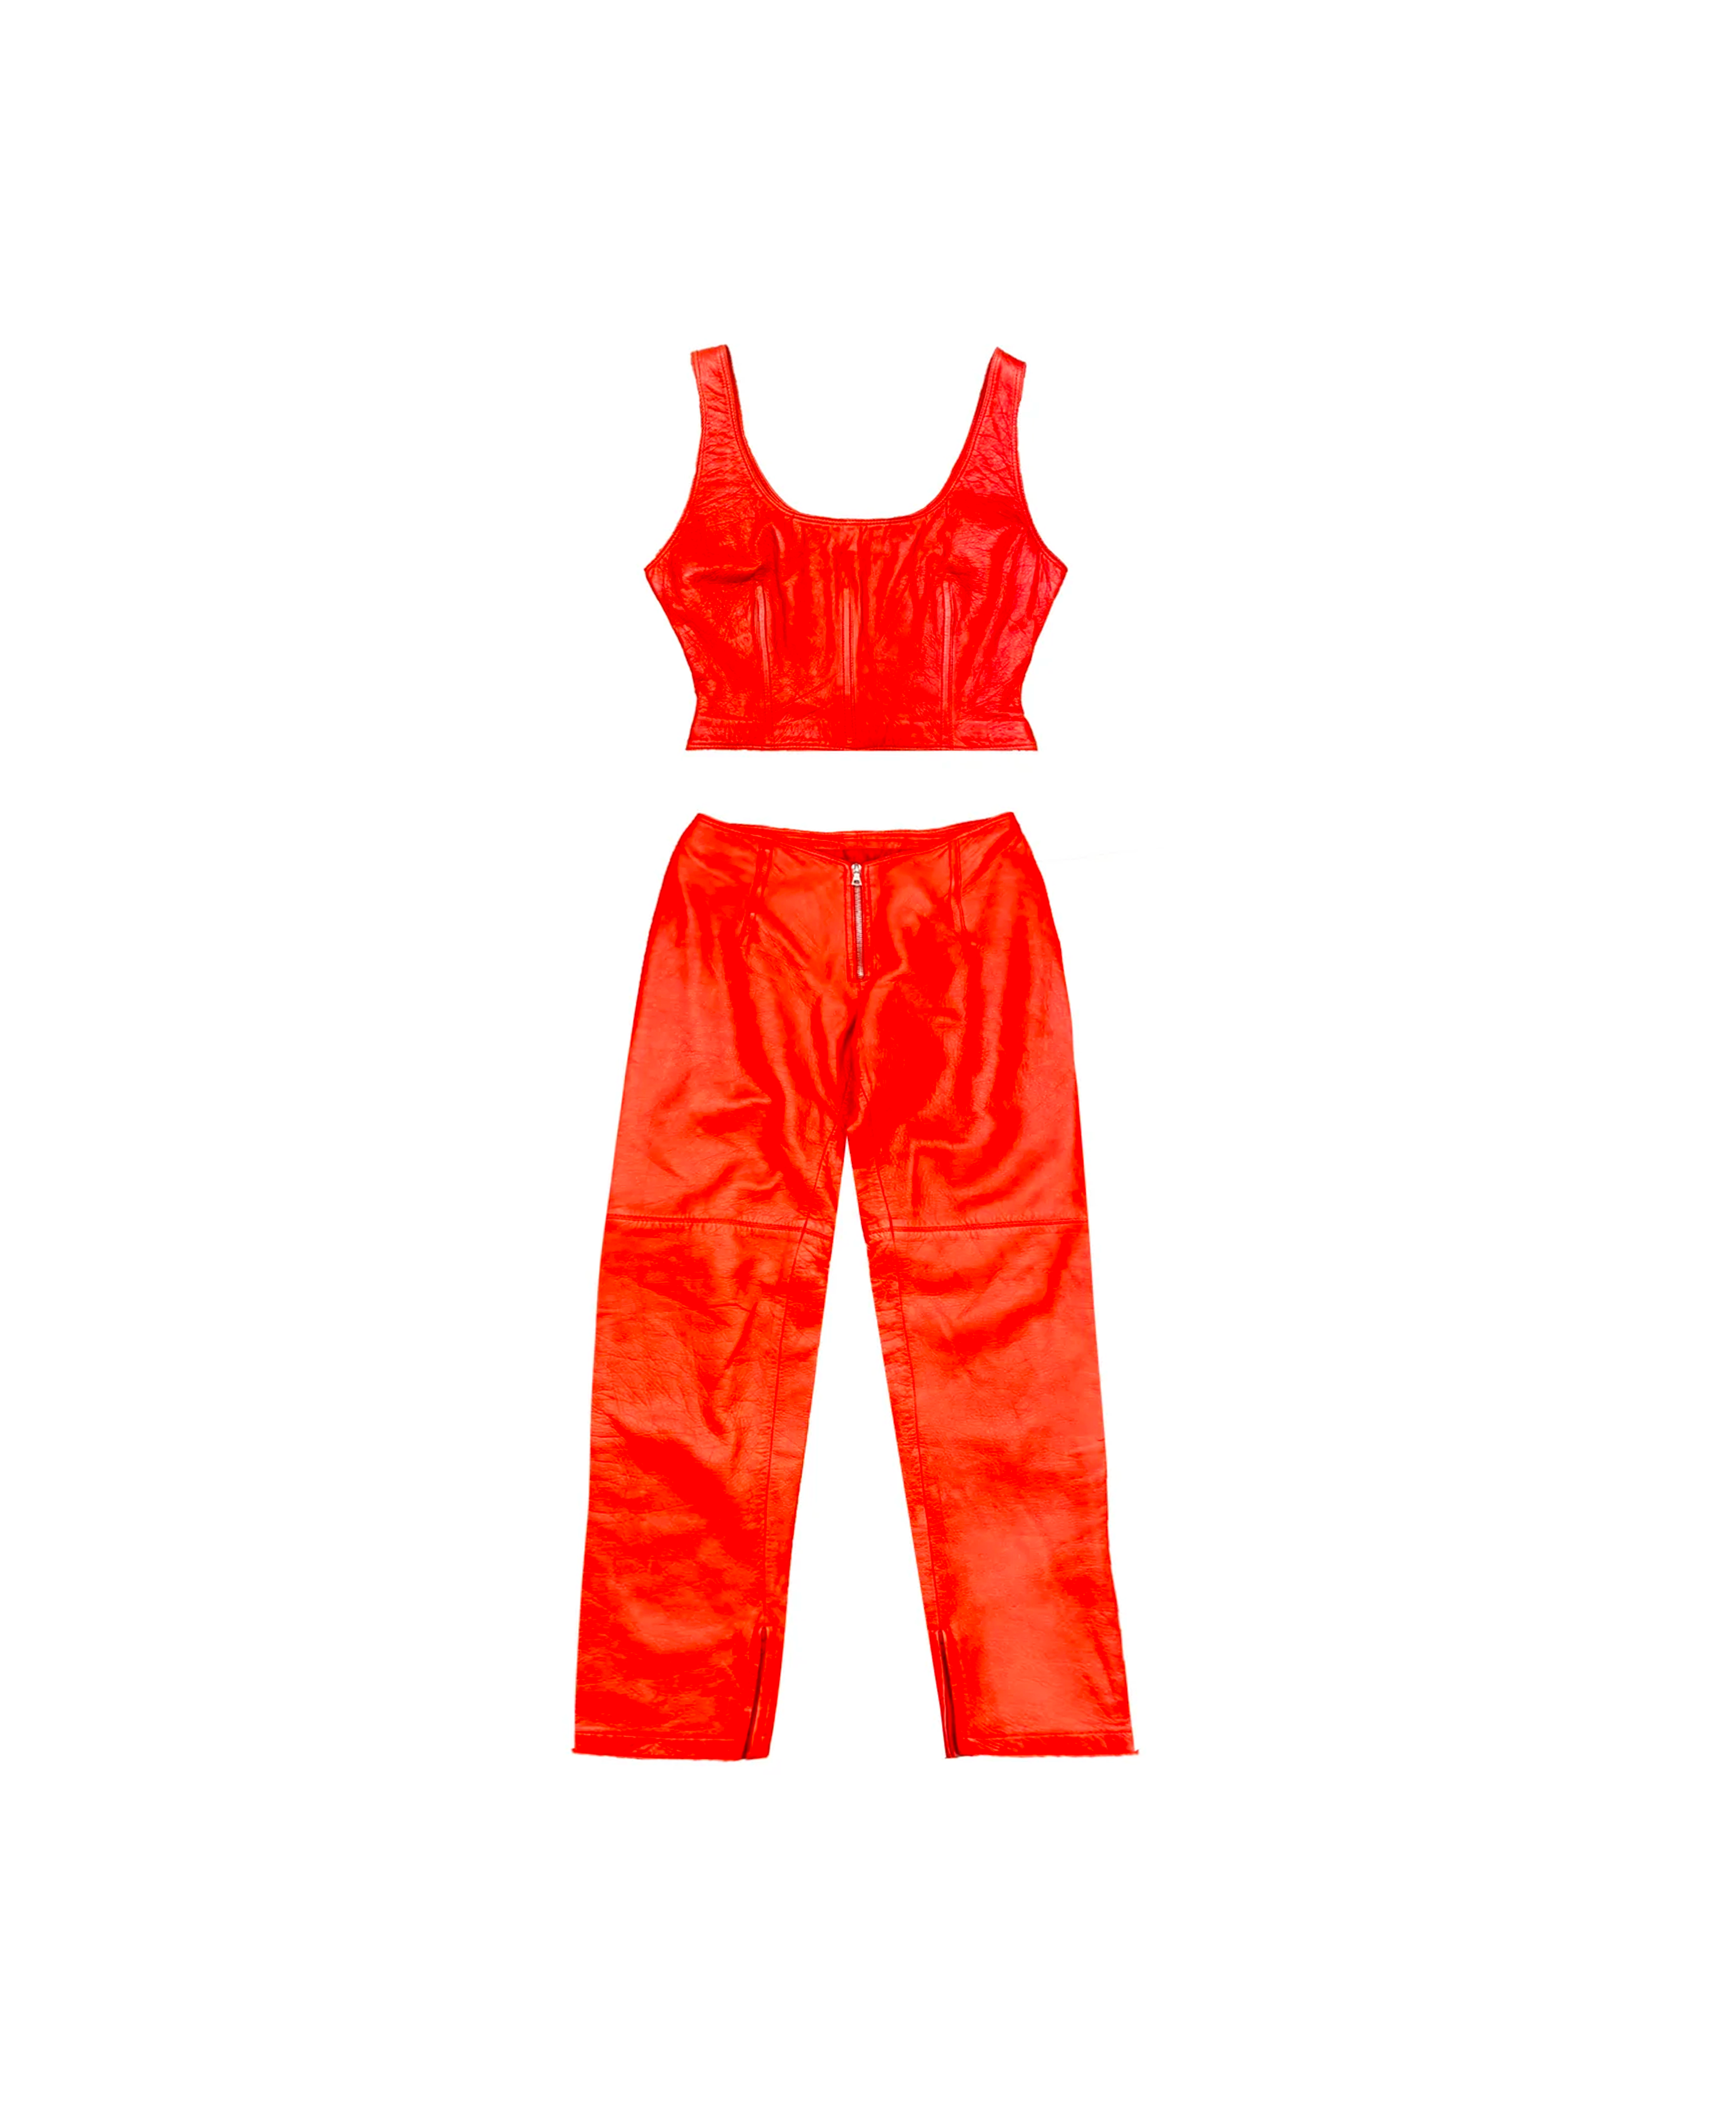 Gianni Versace 1980s Coral Red Leather Corset and Pants Set